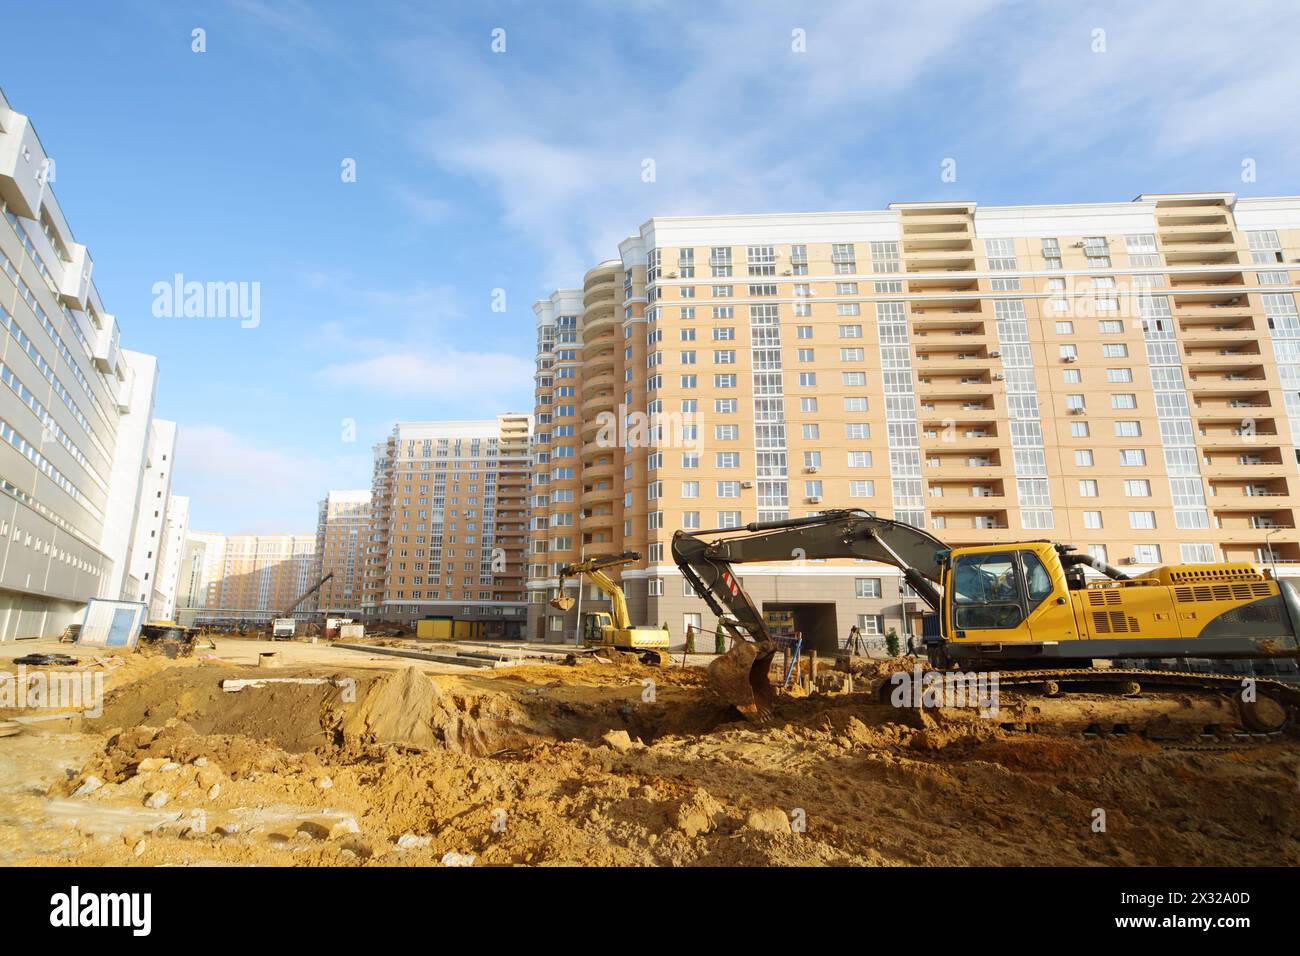 Excavators dig ground near high multi-storey building under construction and parking (on left) at sunny day. Stock Photo